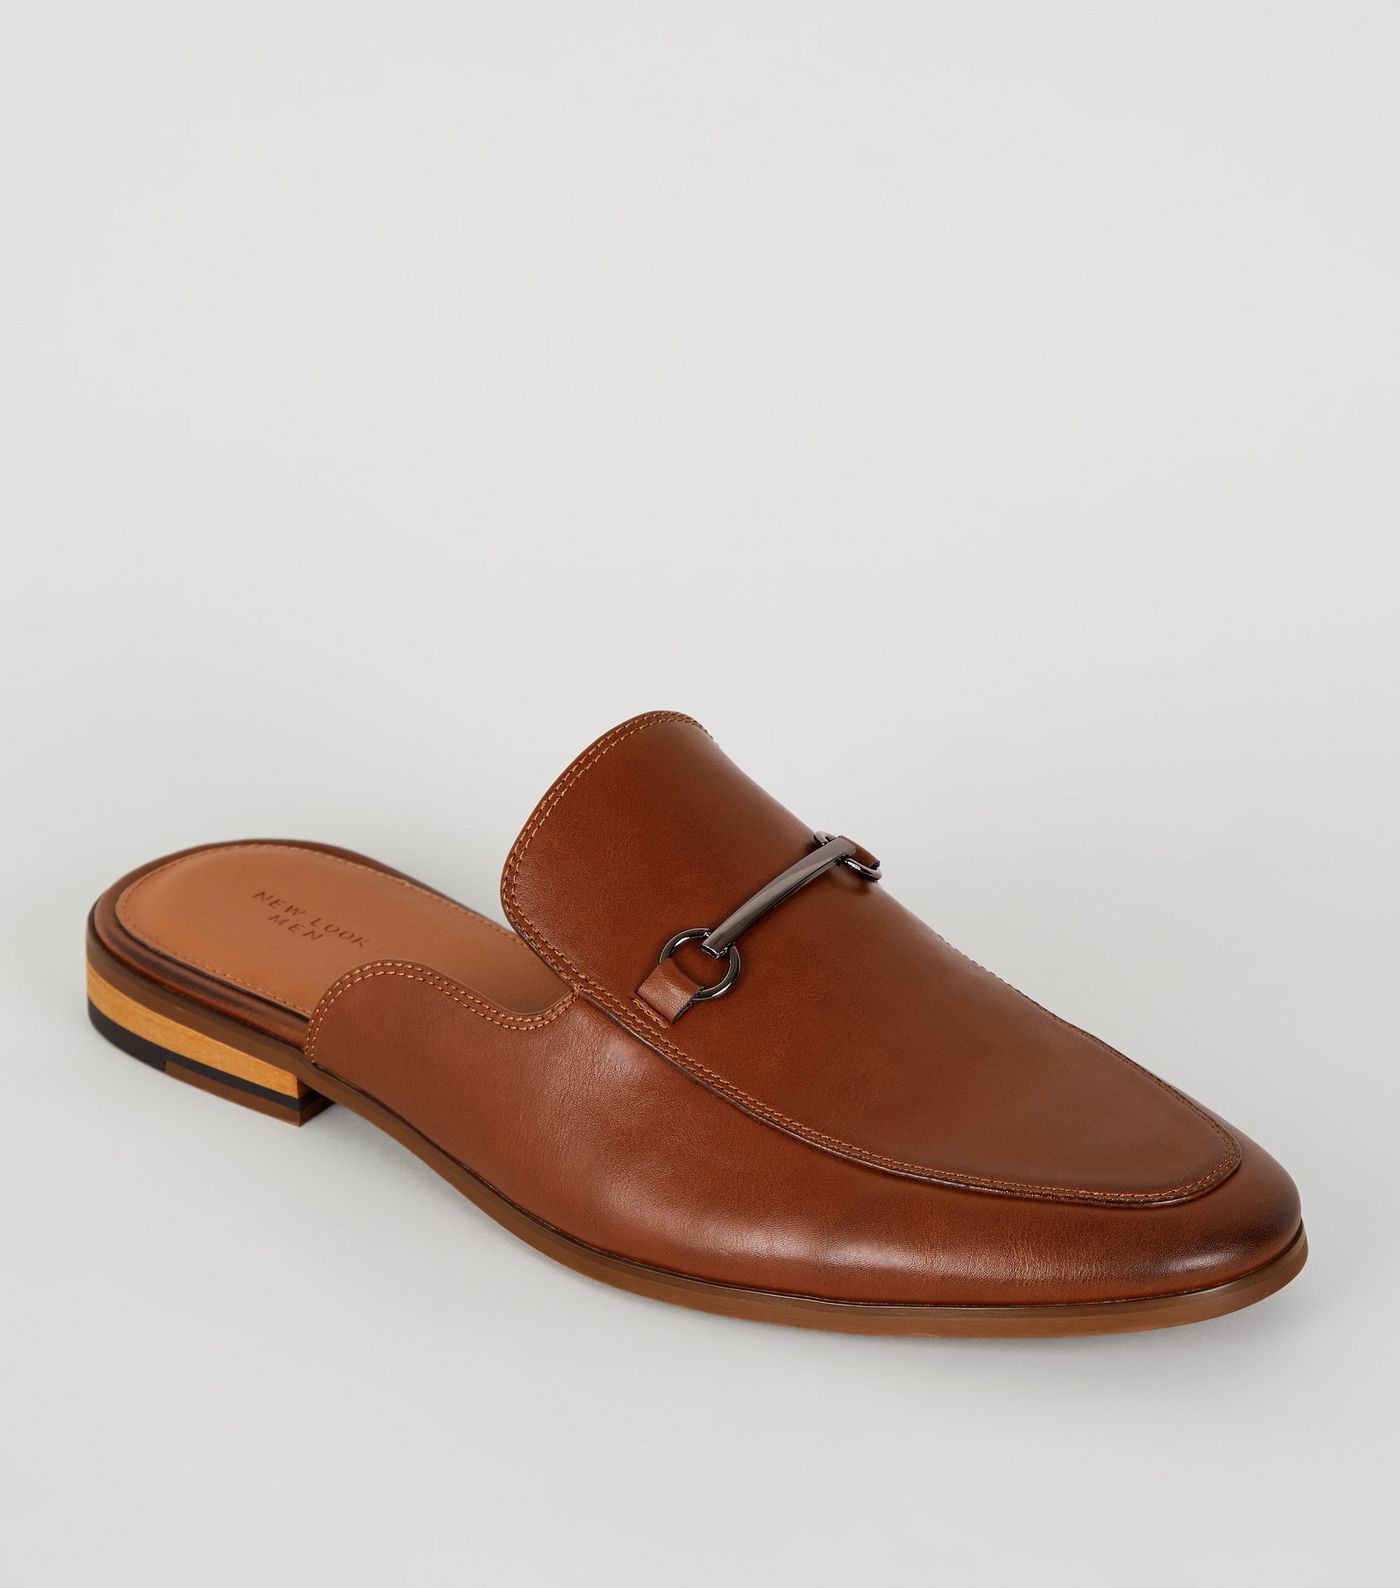 Men's Mule Loafers Where to Buy the Best Styles VanityForbes